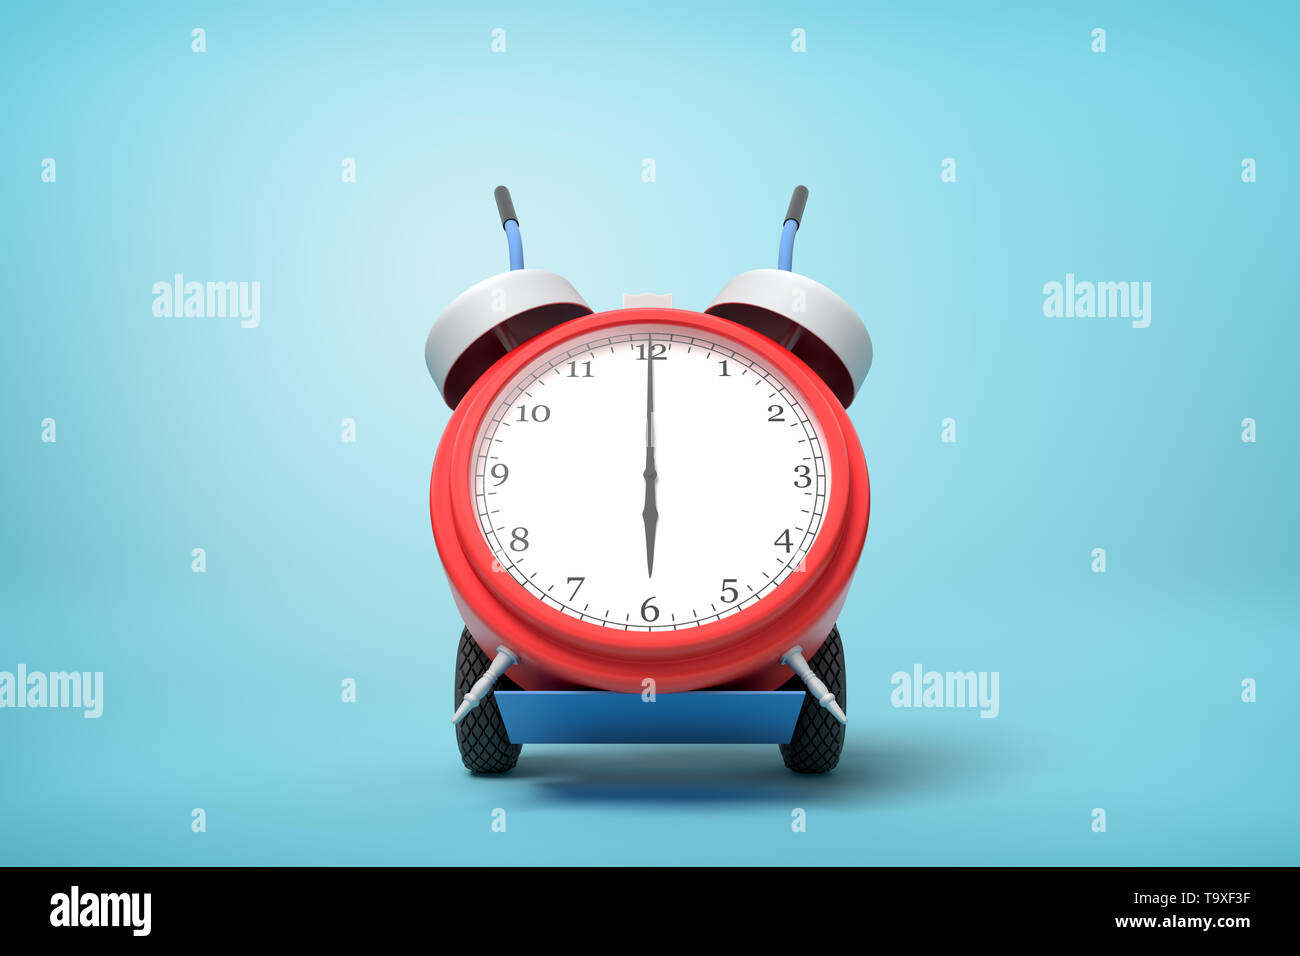 3d rendering of alarm clock on a hand truck on blue background Stock Photo